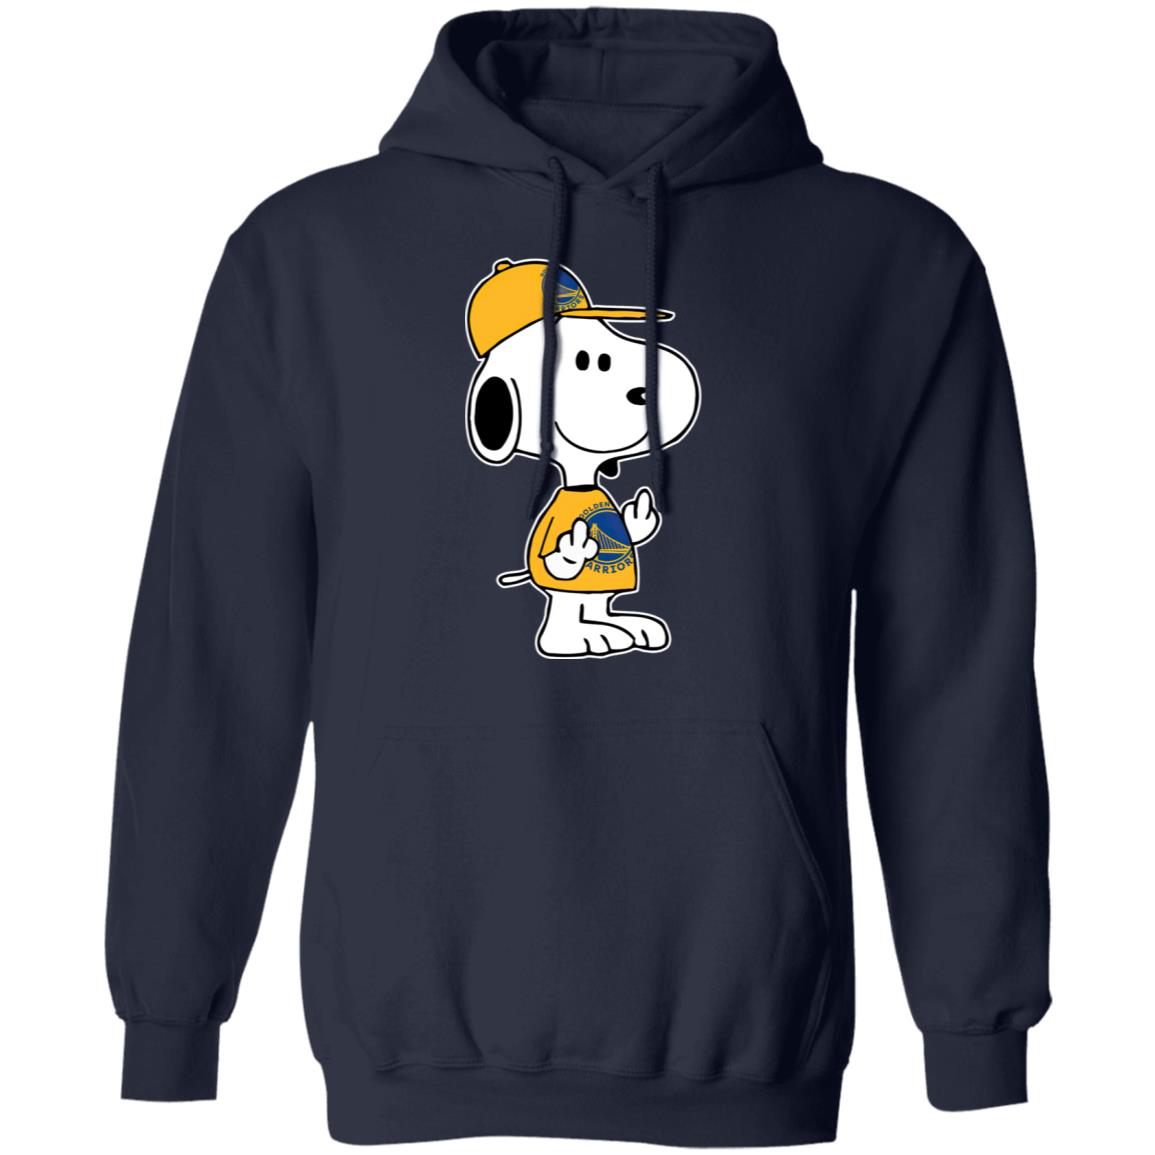 Golden State Warriors Snoopy Dabbing Shirt - High-Quality Printed